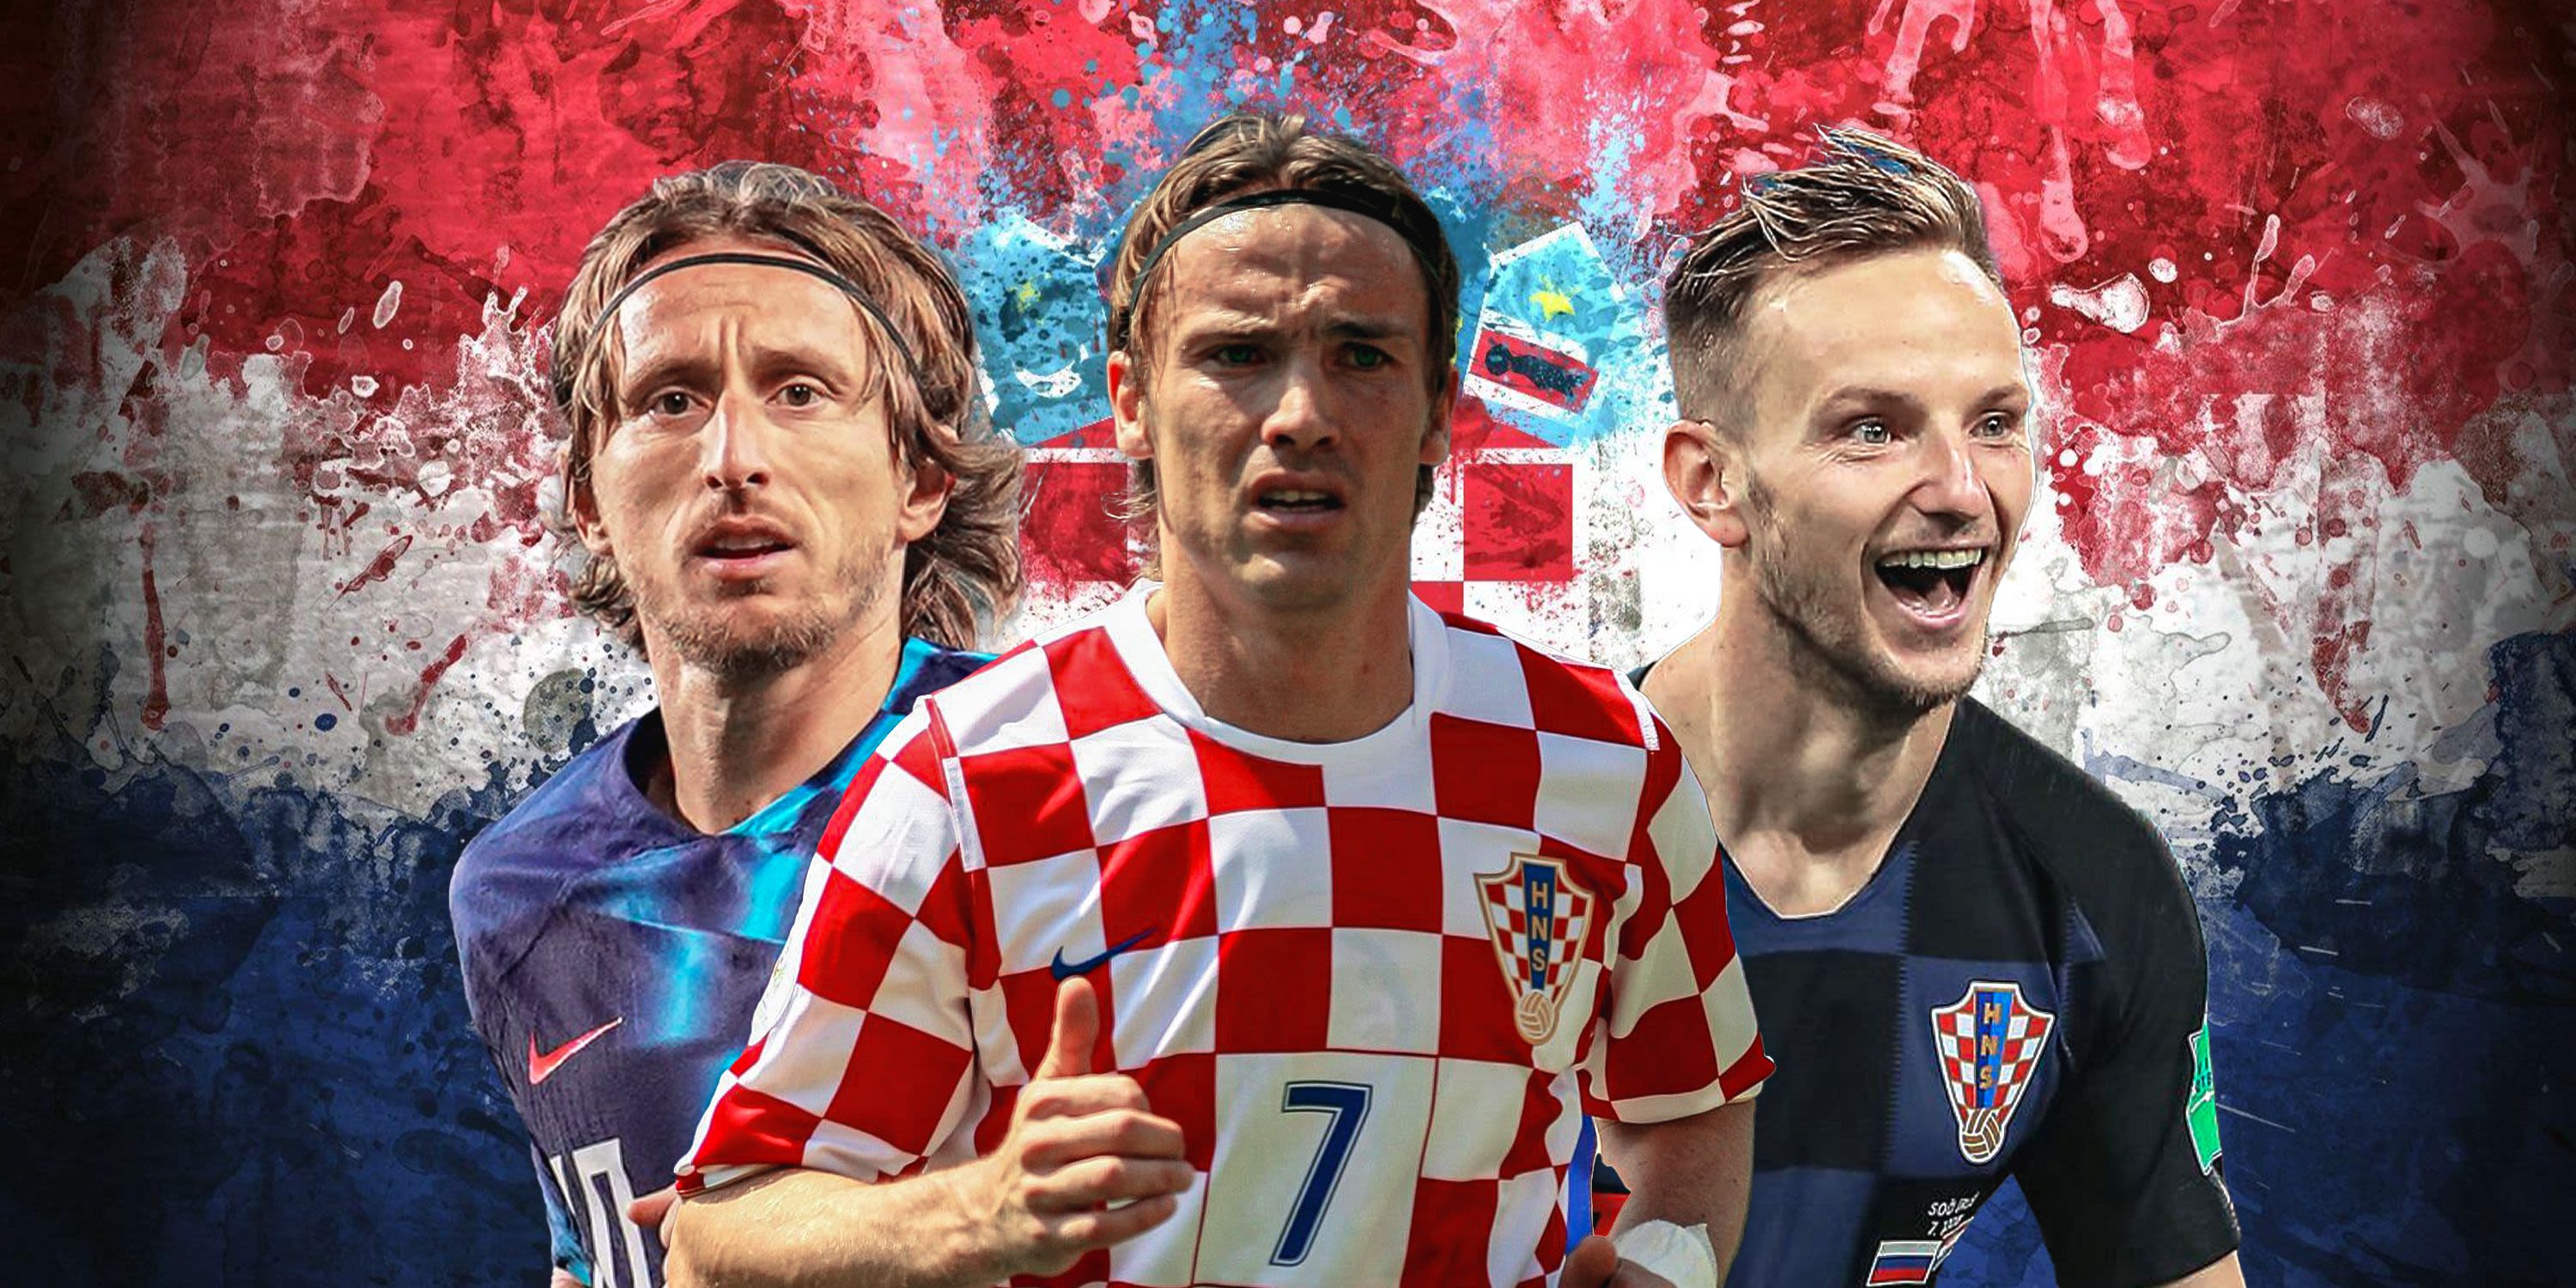 The 10 greatest Croatian players in football history have been ranked